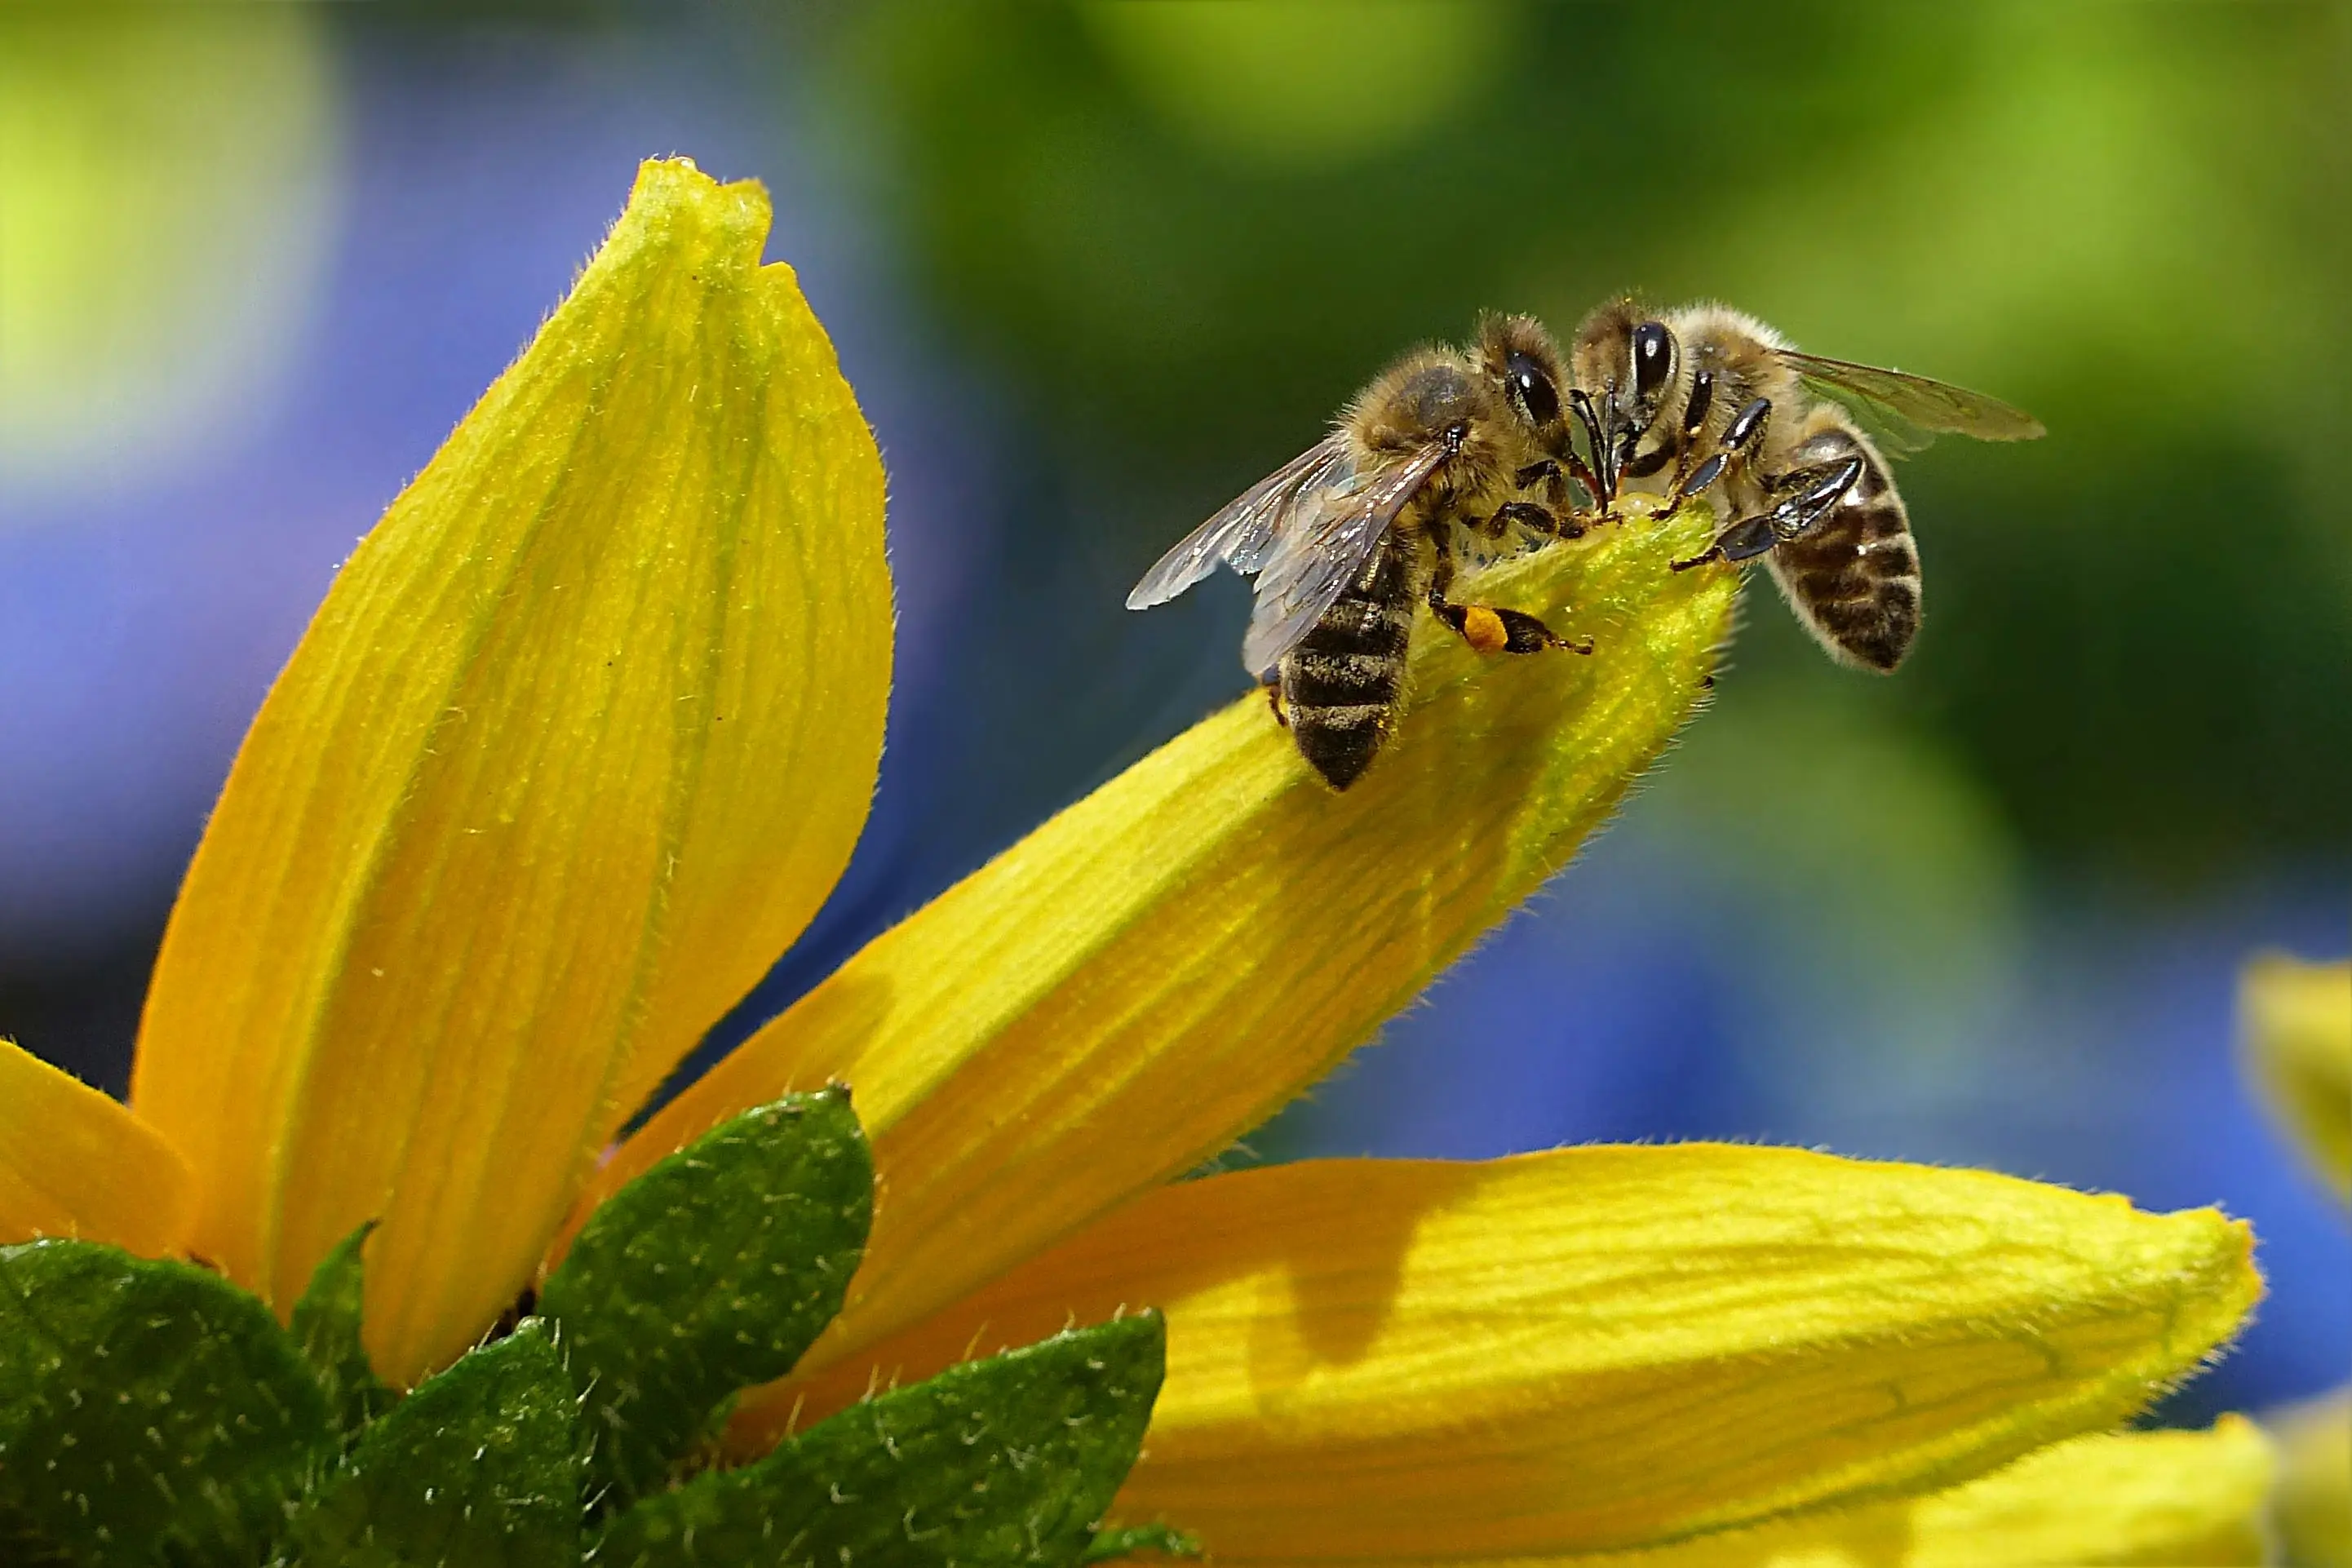 Amazon discounts platform How to Protect bees - The Role of Bees in Pollination